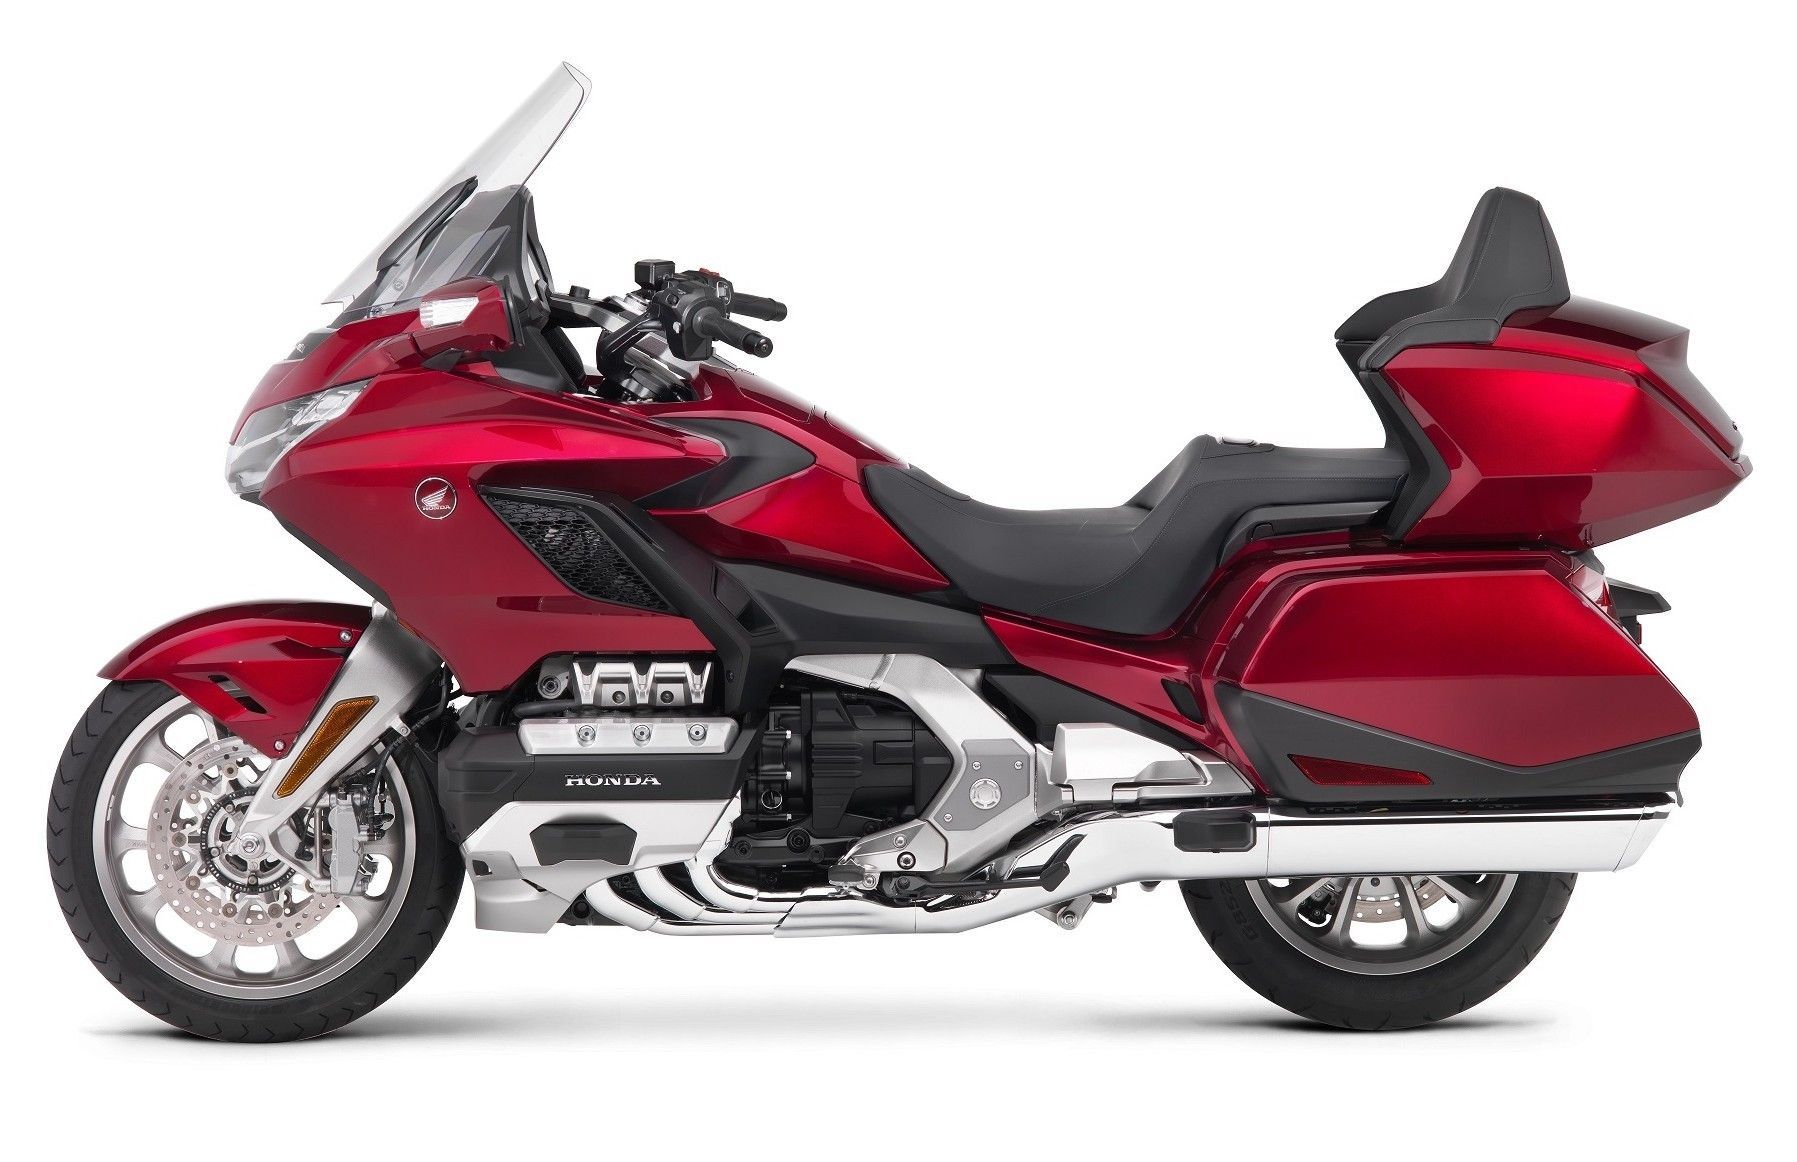 Honda Goldwing launched in India